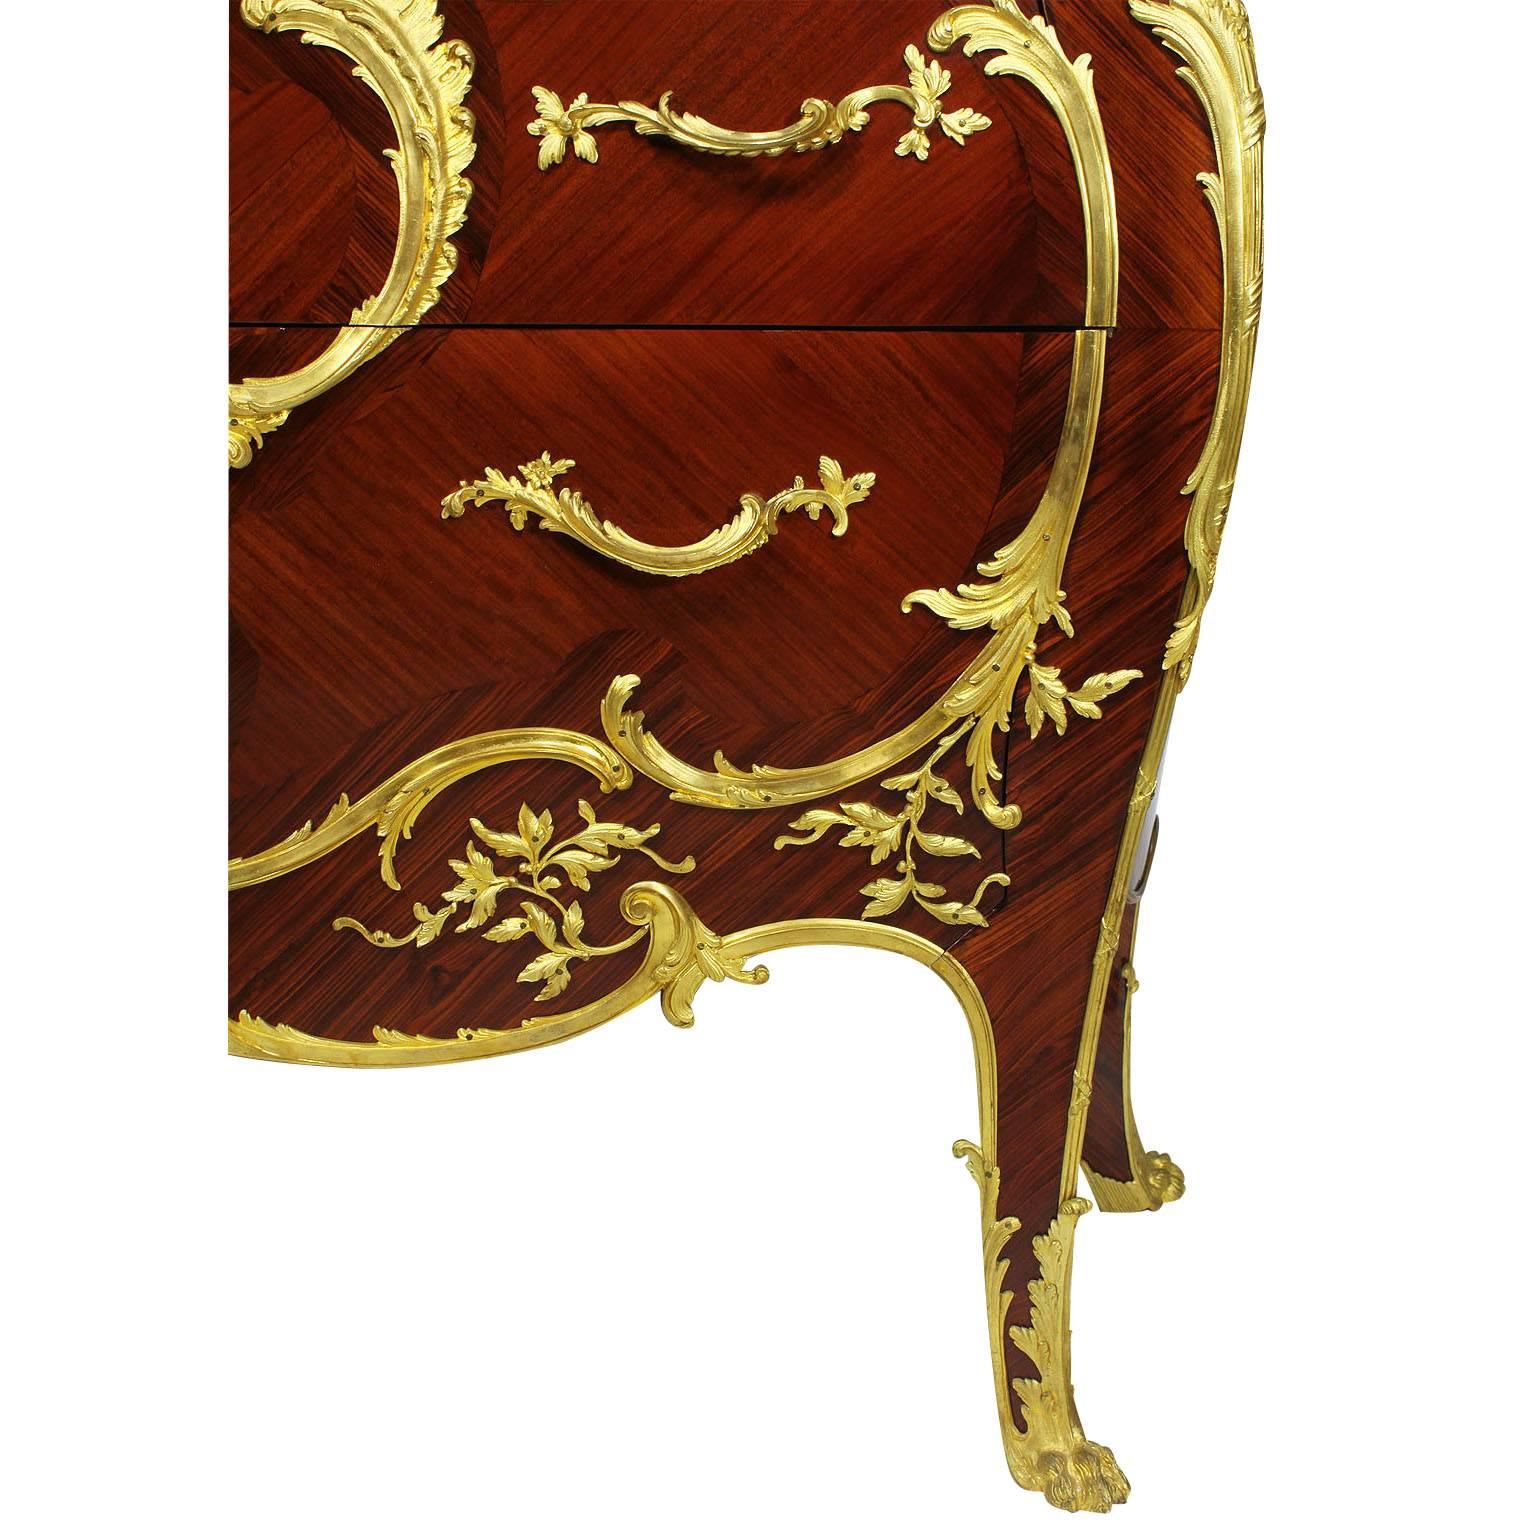 Veneer French 19th-20th Century Louis XV Style Ormolu-Mounted Commode For Sale